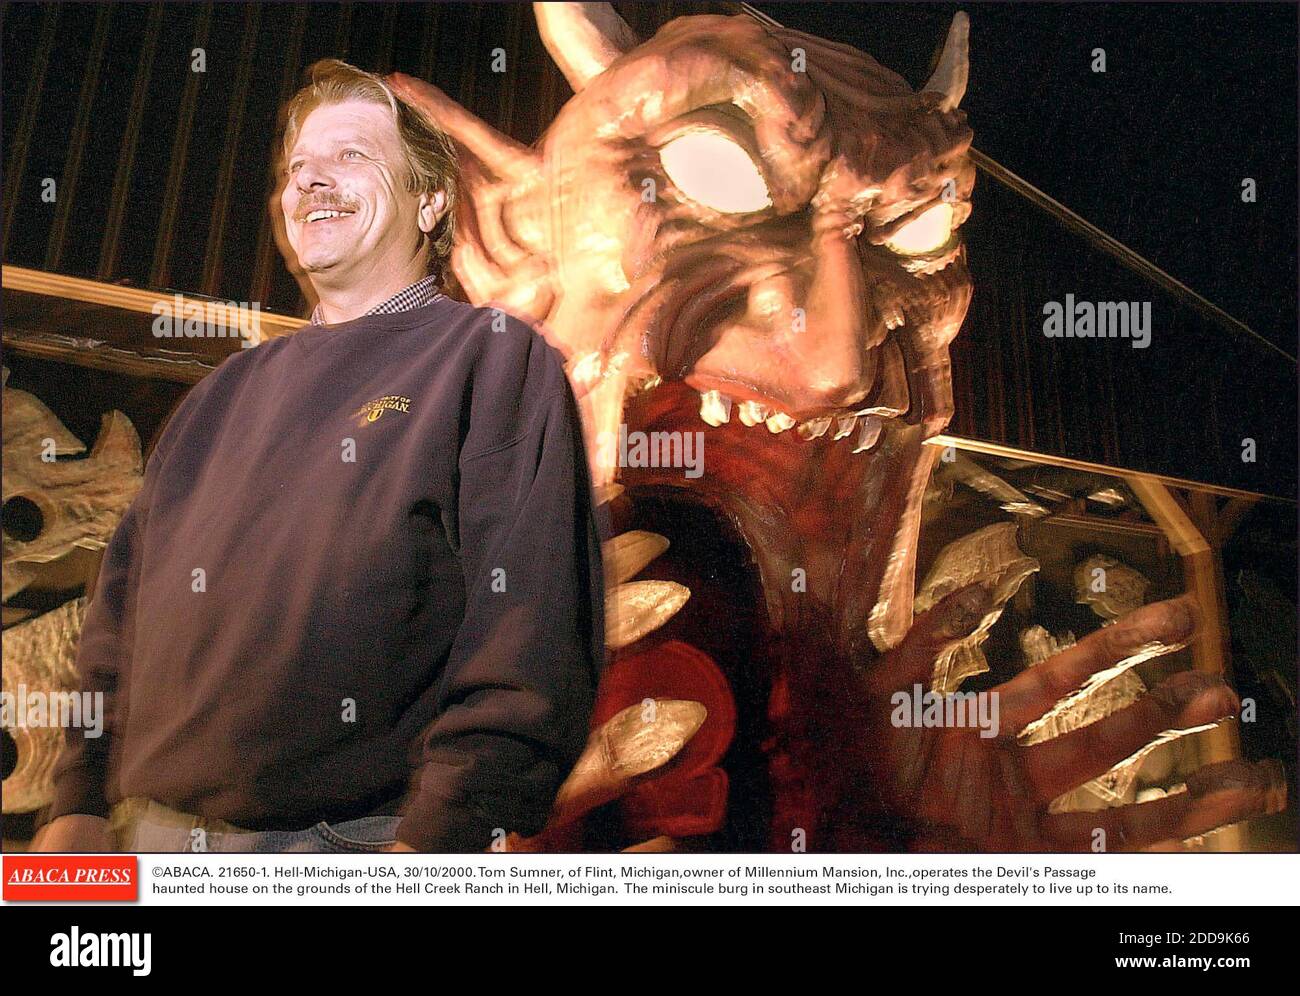 NO FILM, NO VIDEO, NO TV, NO DOCUMENTARY - ©ABACA. 21650-1. Hell-Michigan-USA, 30/10/2000. Tom Sumner, of Flint, Michigan, owner of Millennium Mansion, Inc., operates the Devil's Passage haunted house on the grounds of the Hell Creek Ranch in Hell, Michigan. The miniscule burg in southeast Michiga Stock Photo